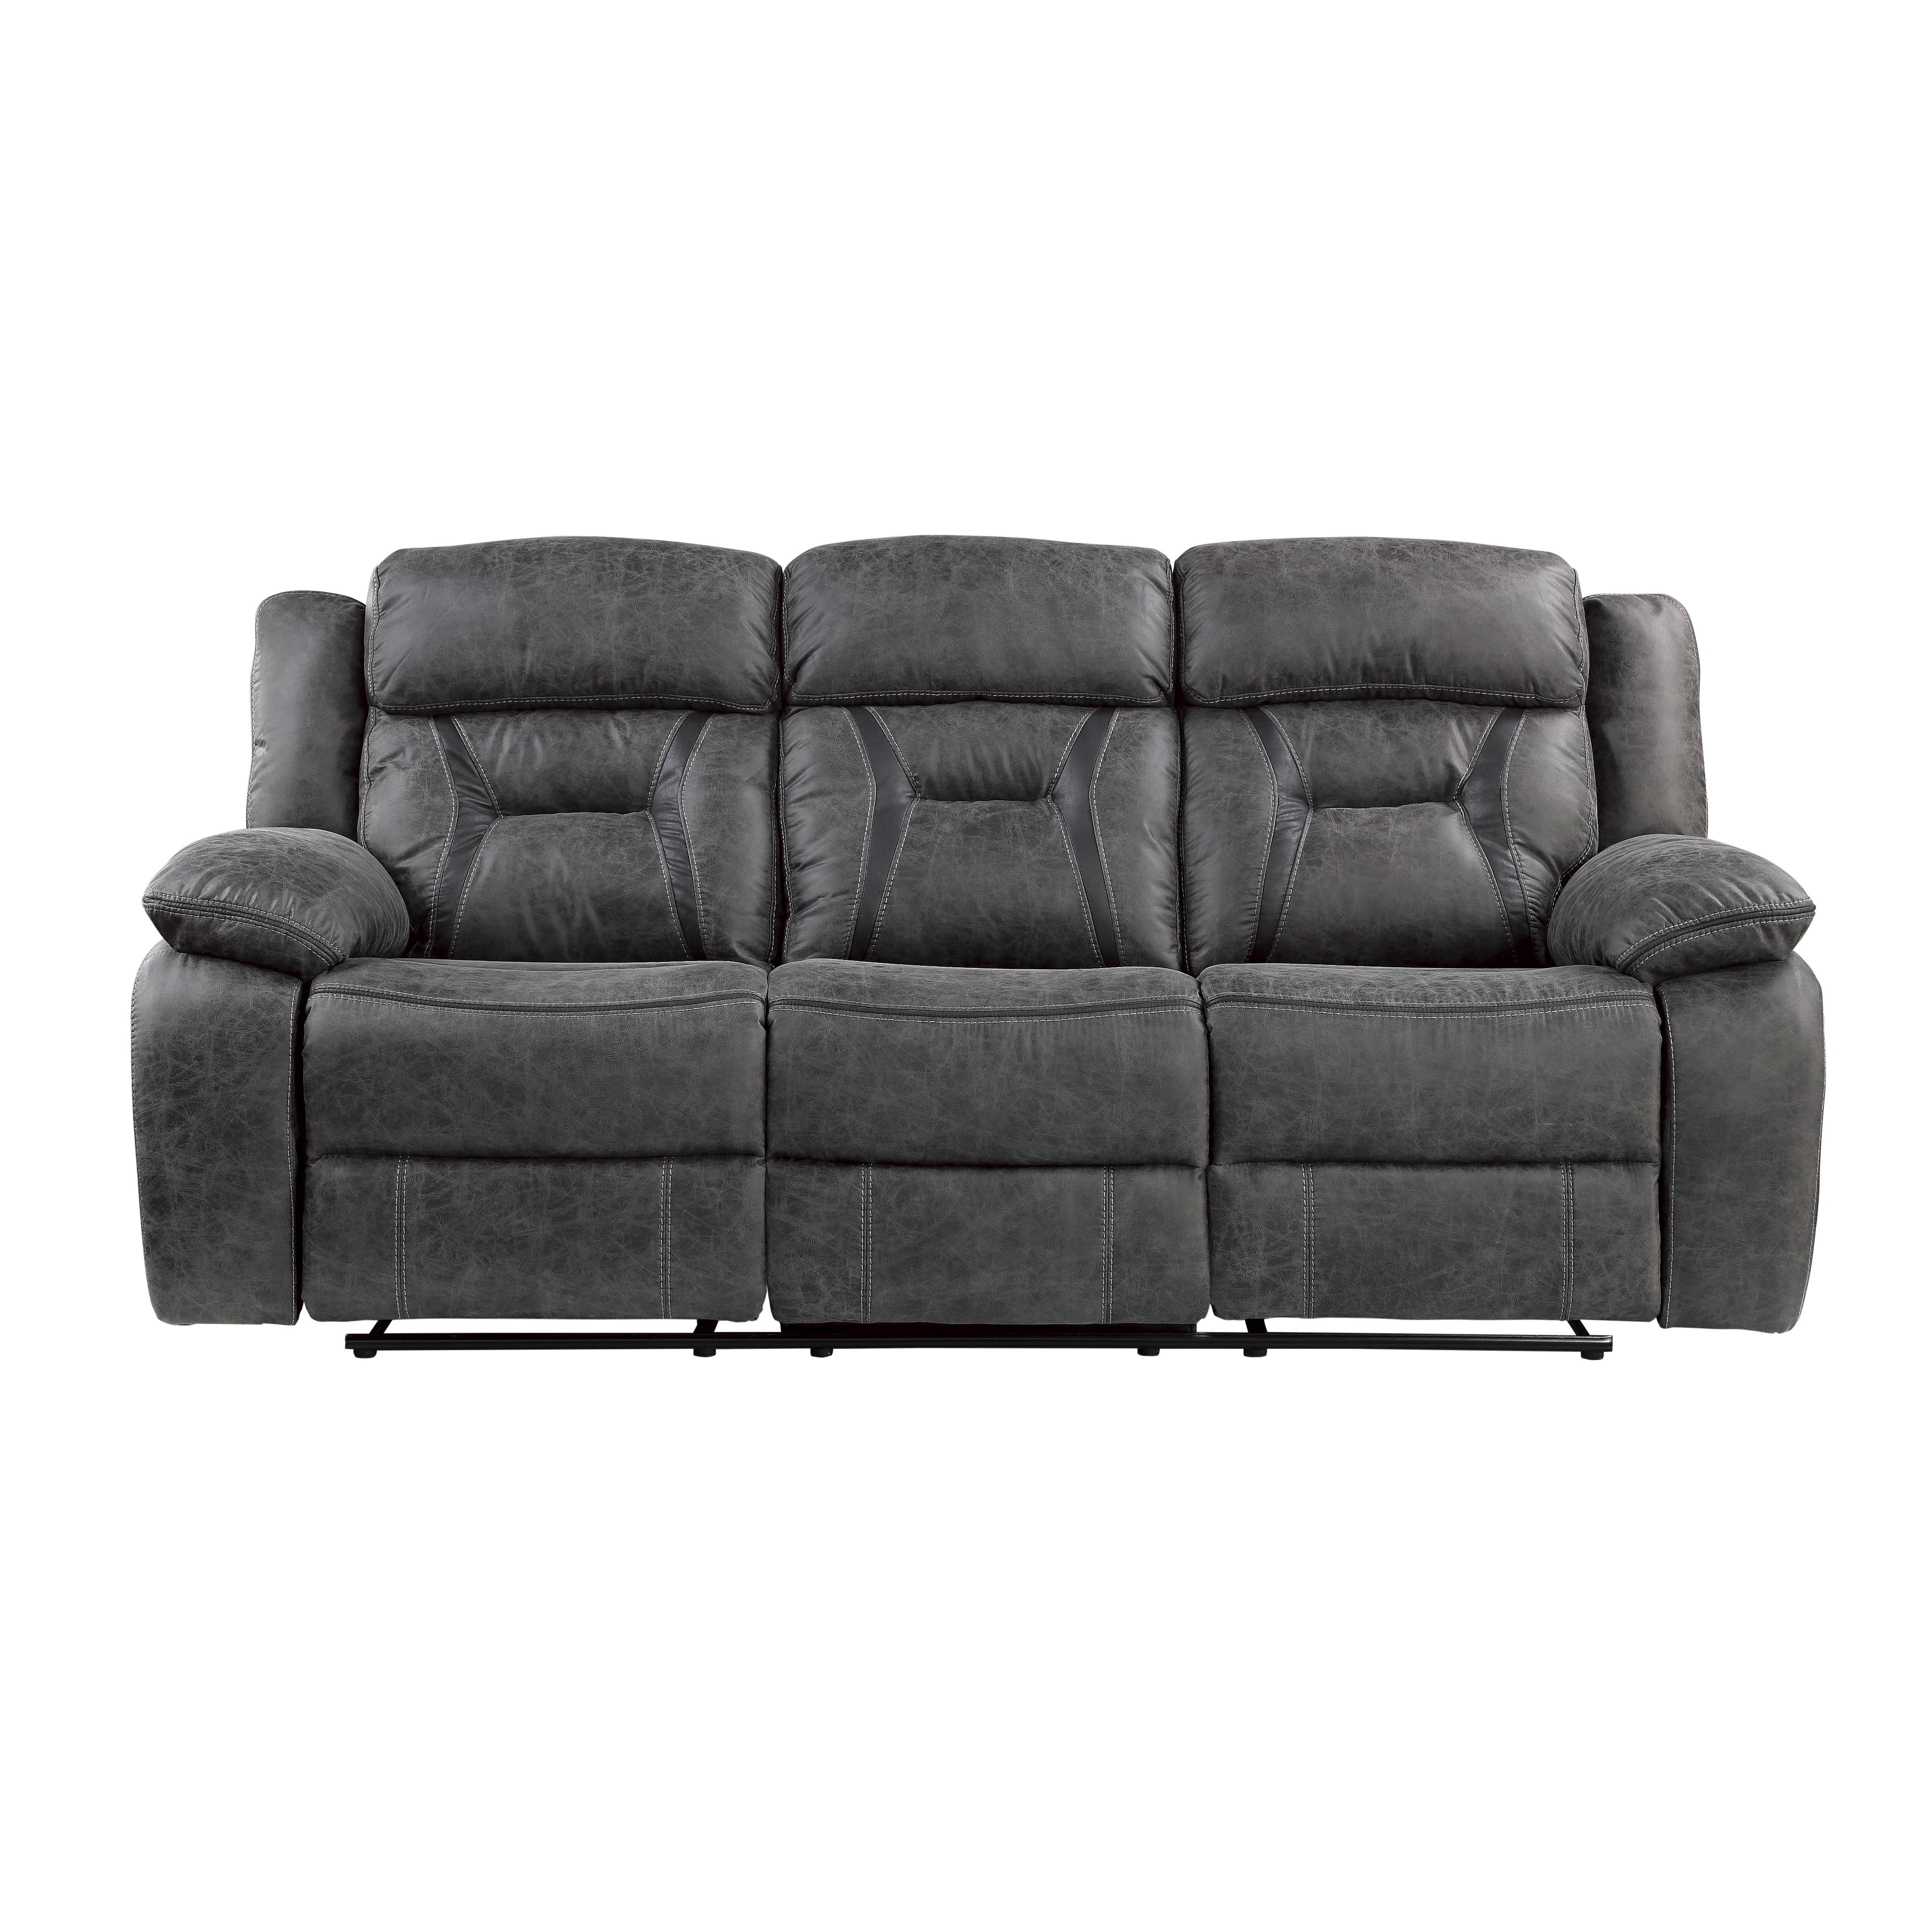 Modern Reclining Sofa 9989GY-3 Madrona Hill 9989GY-3 in Gray Microfiber